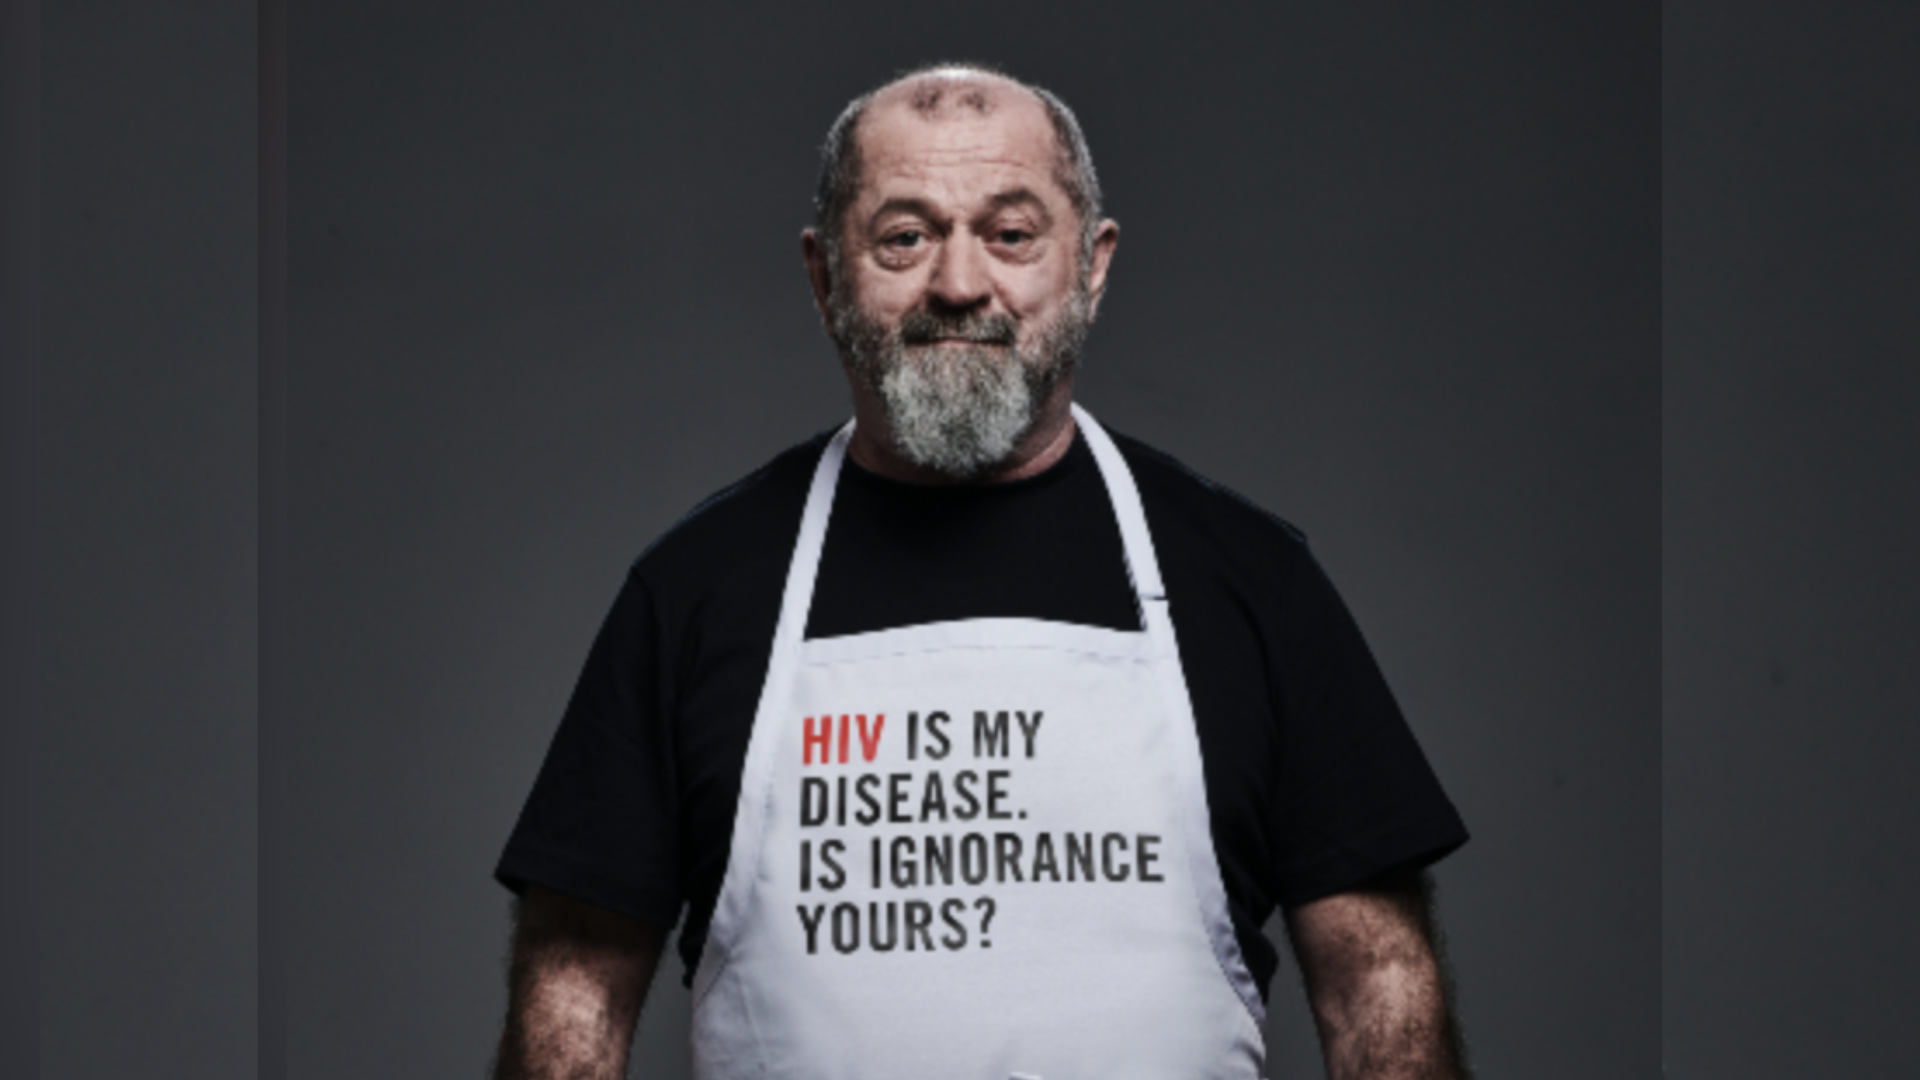 Allan Carpenter — also known as Chef Allan — was diagnosed with HIV in 1988. Credit: Ken Meyers Studio